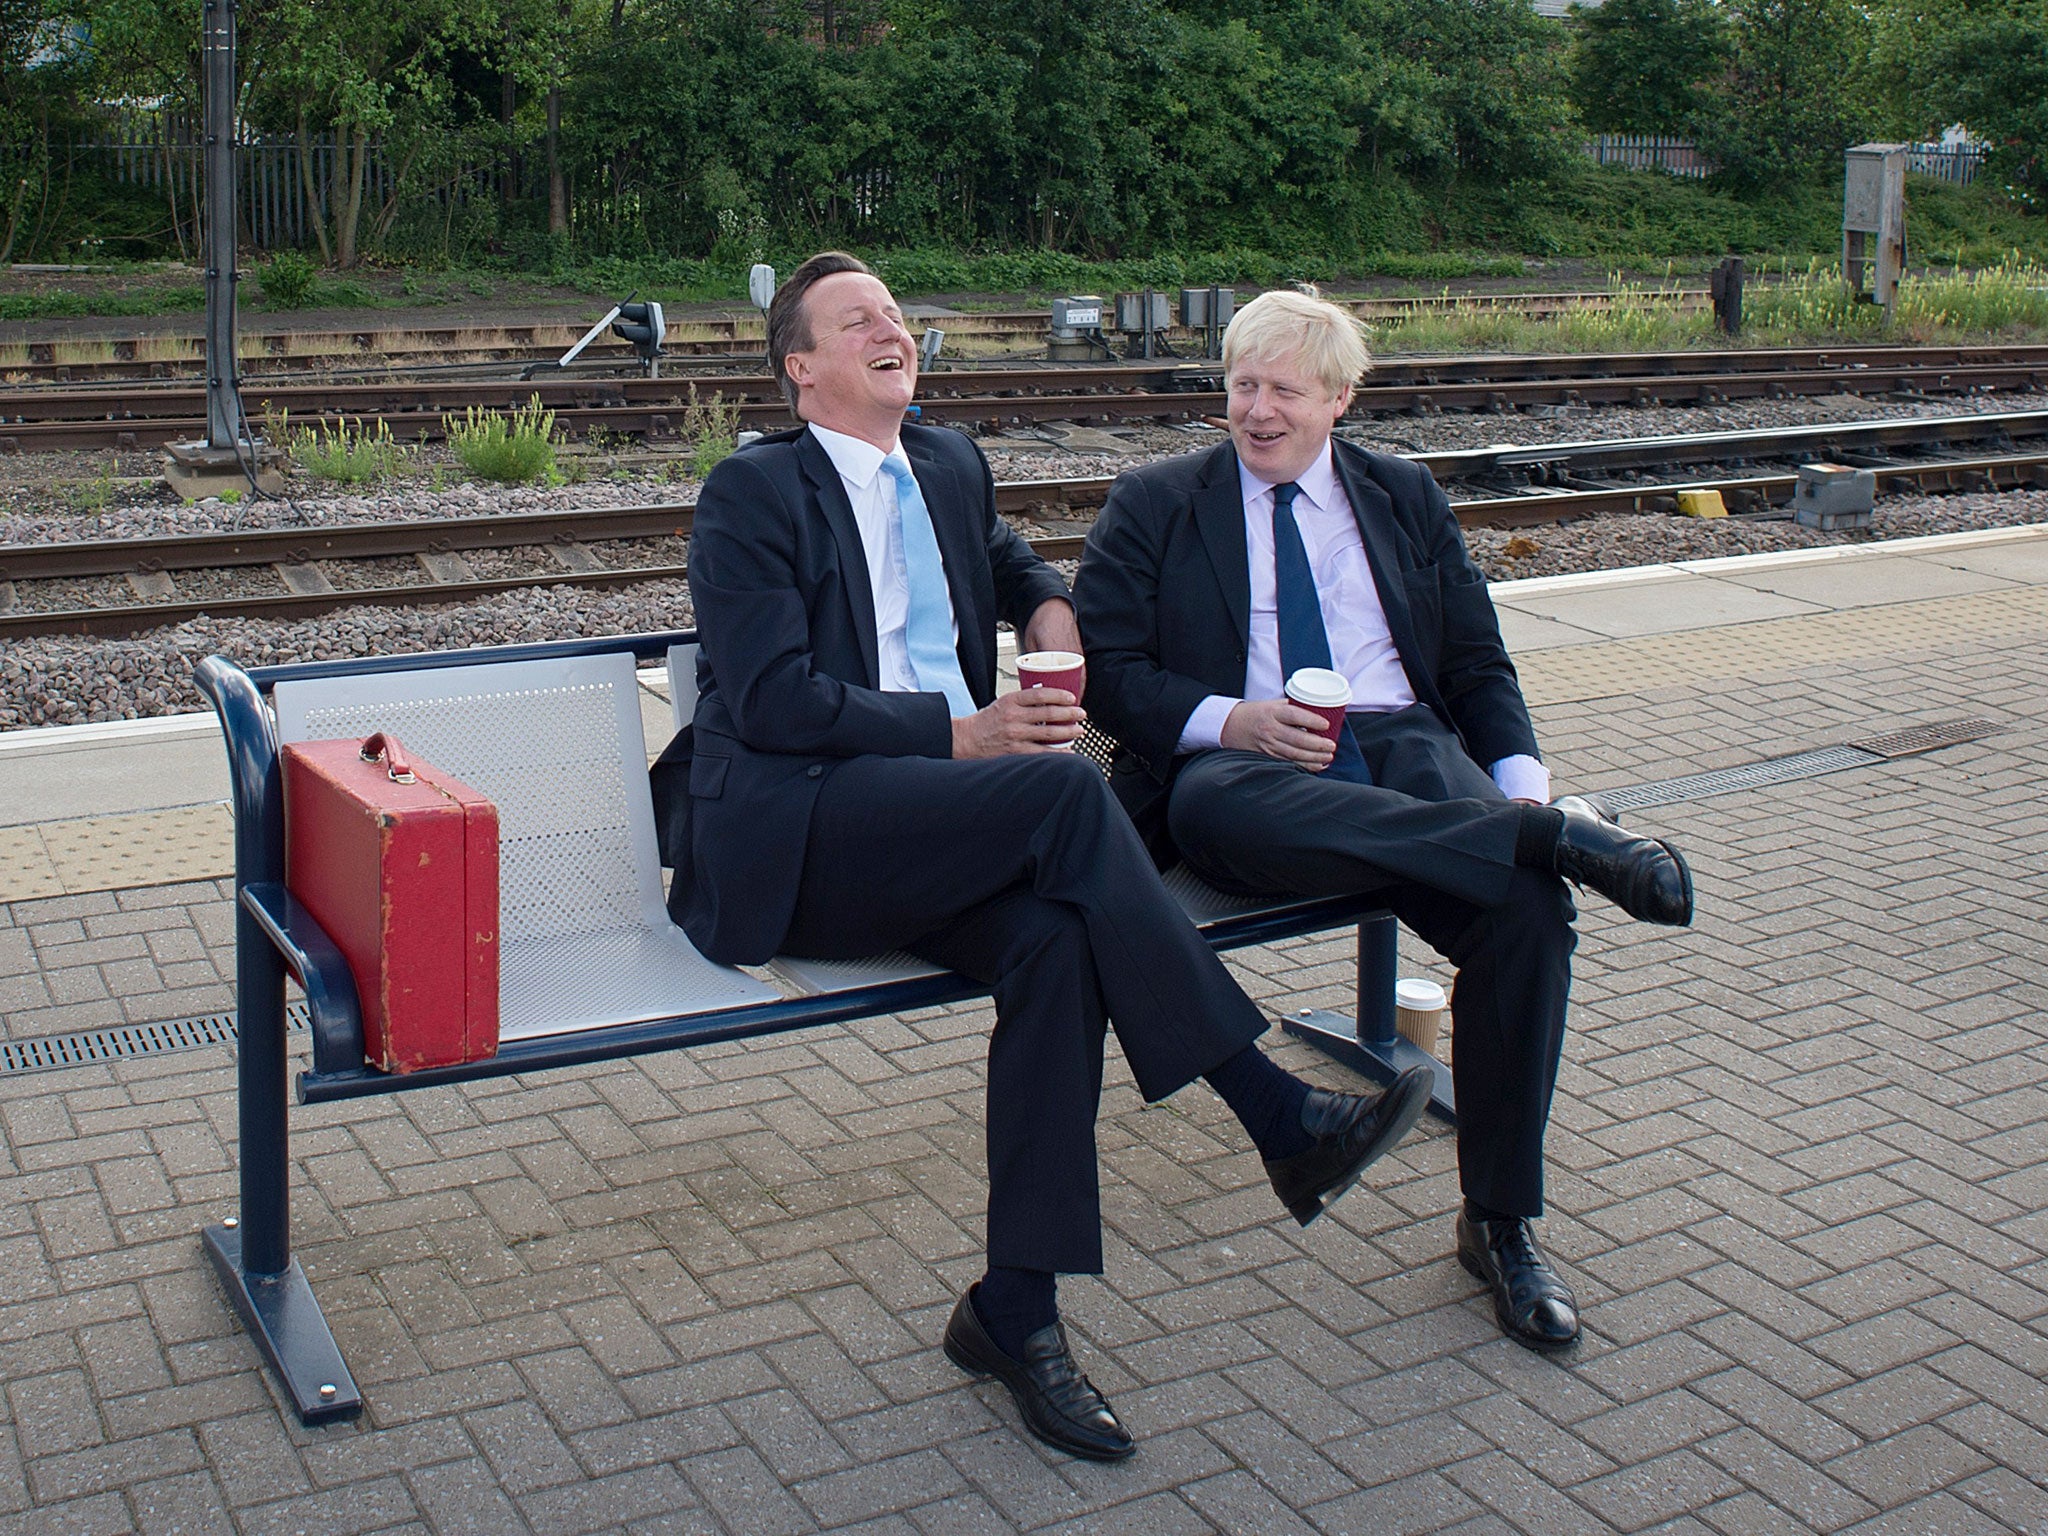 British Prime Minister Prime Minister David Cameron (L) and Mayor of London Boris Johnson wait for a train at Newark station in central England, following a visit to the town were they campaigned ahead of the Newark by-election